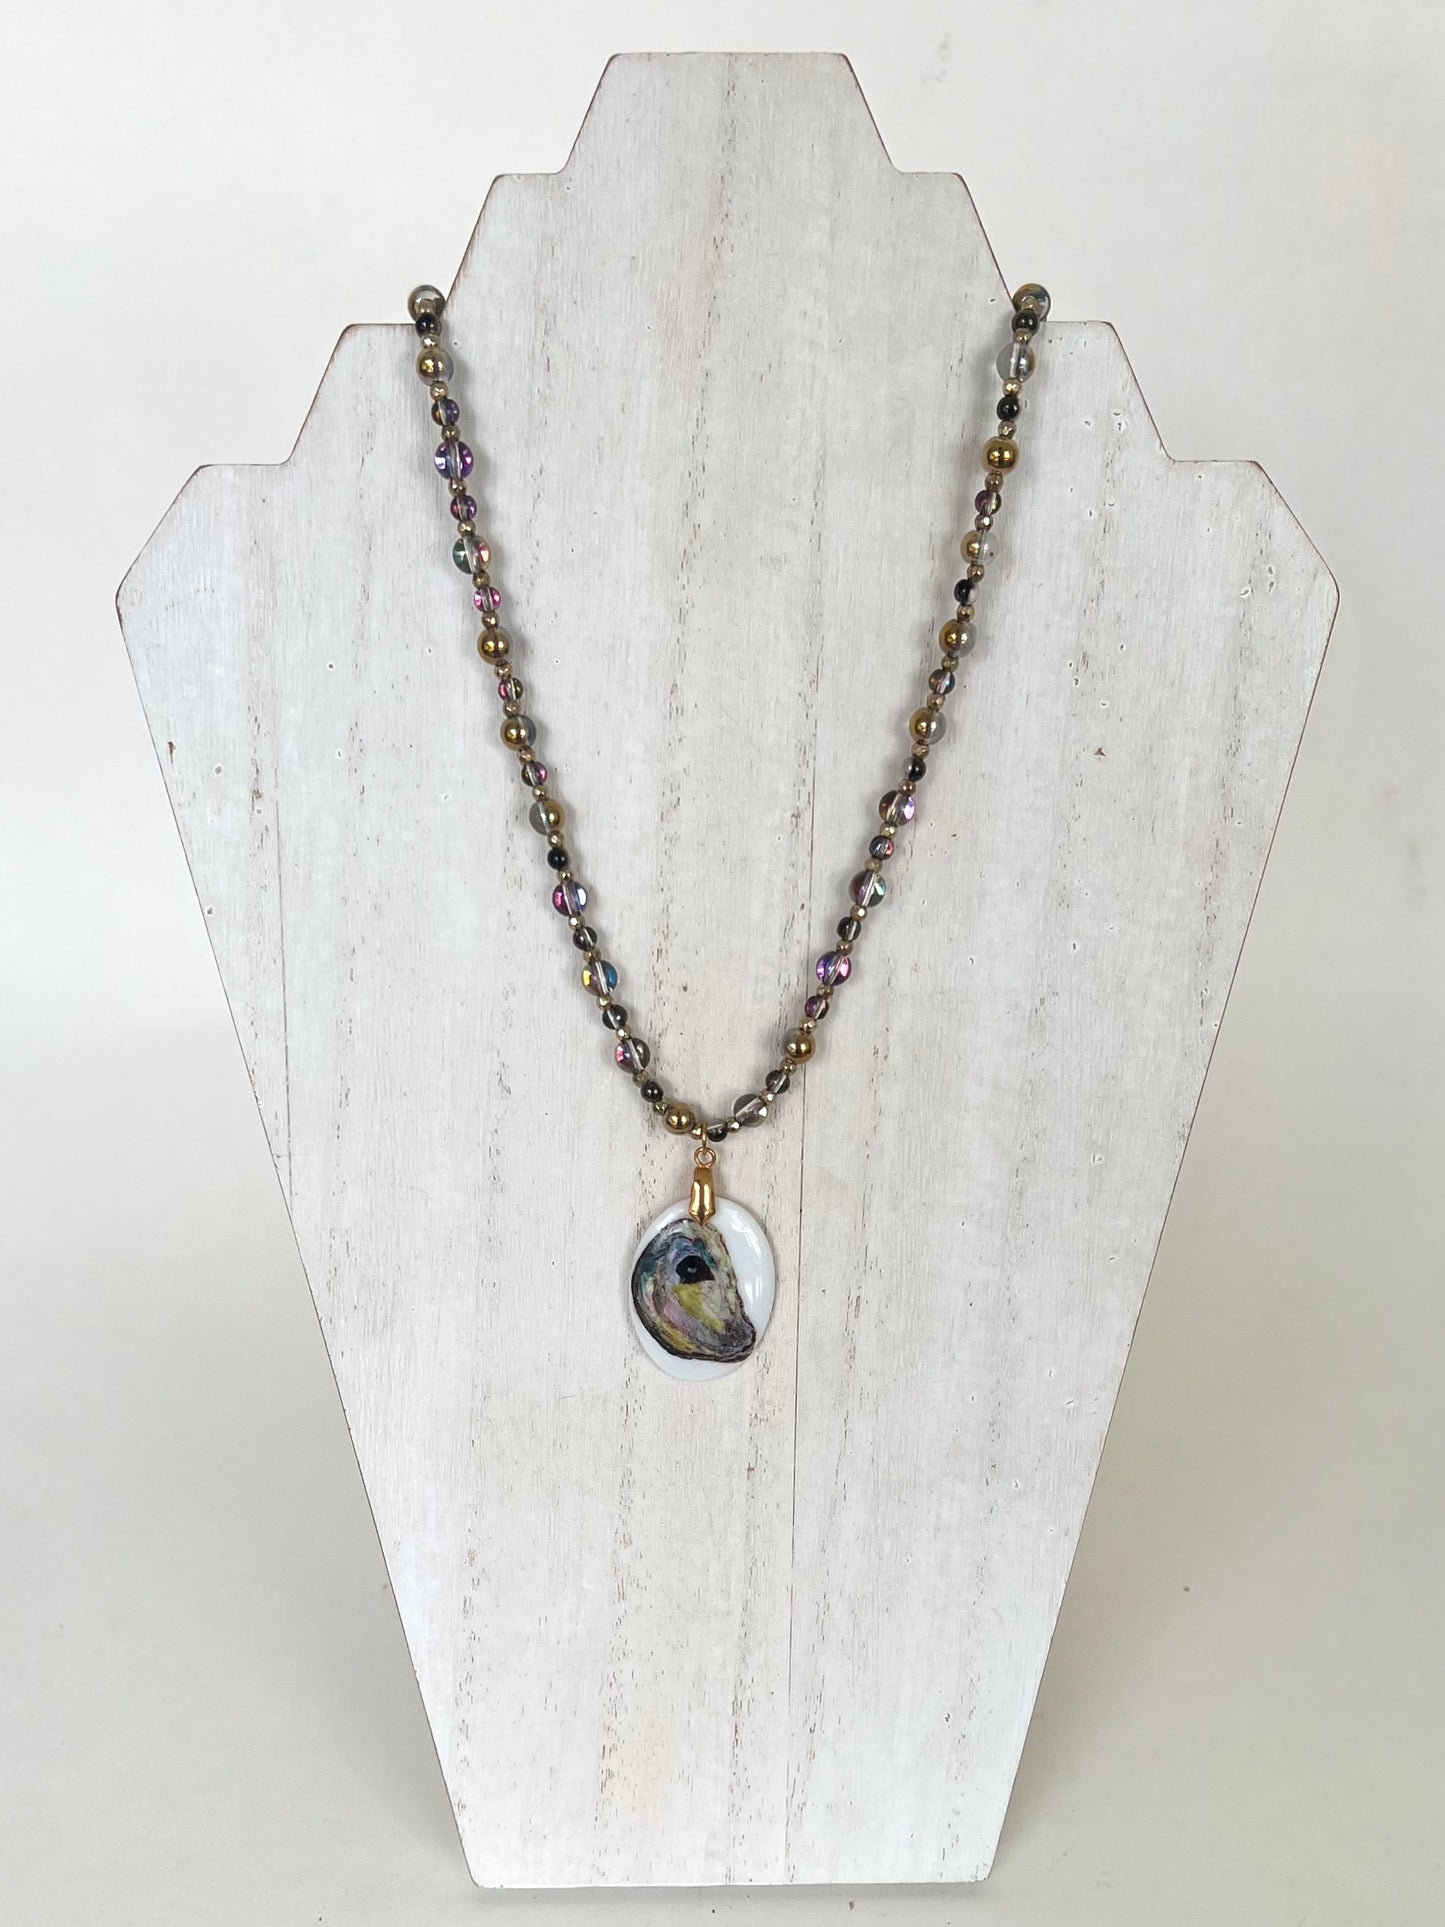 A gift for mom, Oyster Shell Necklace